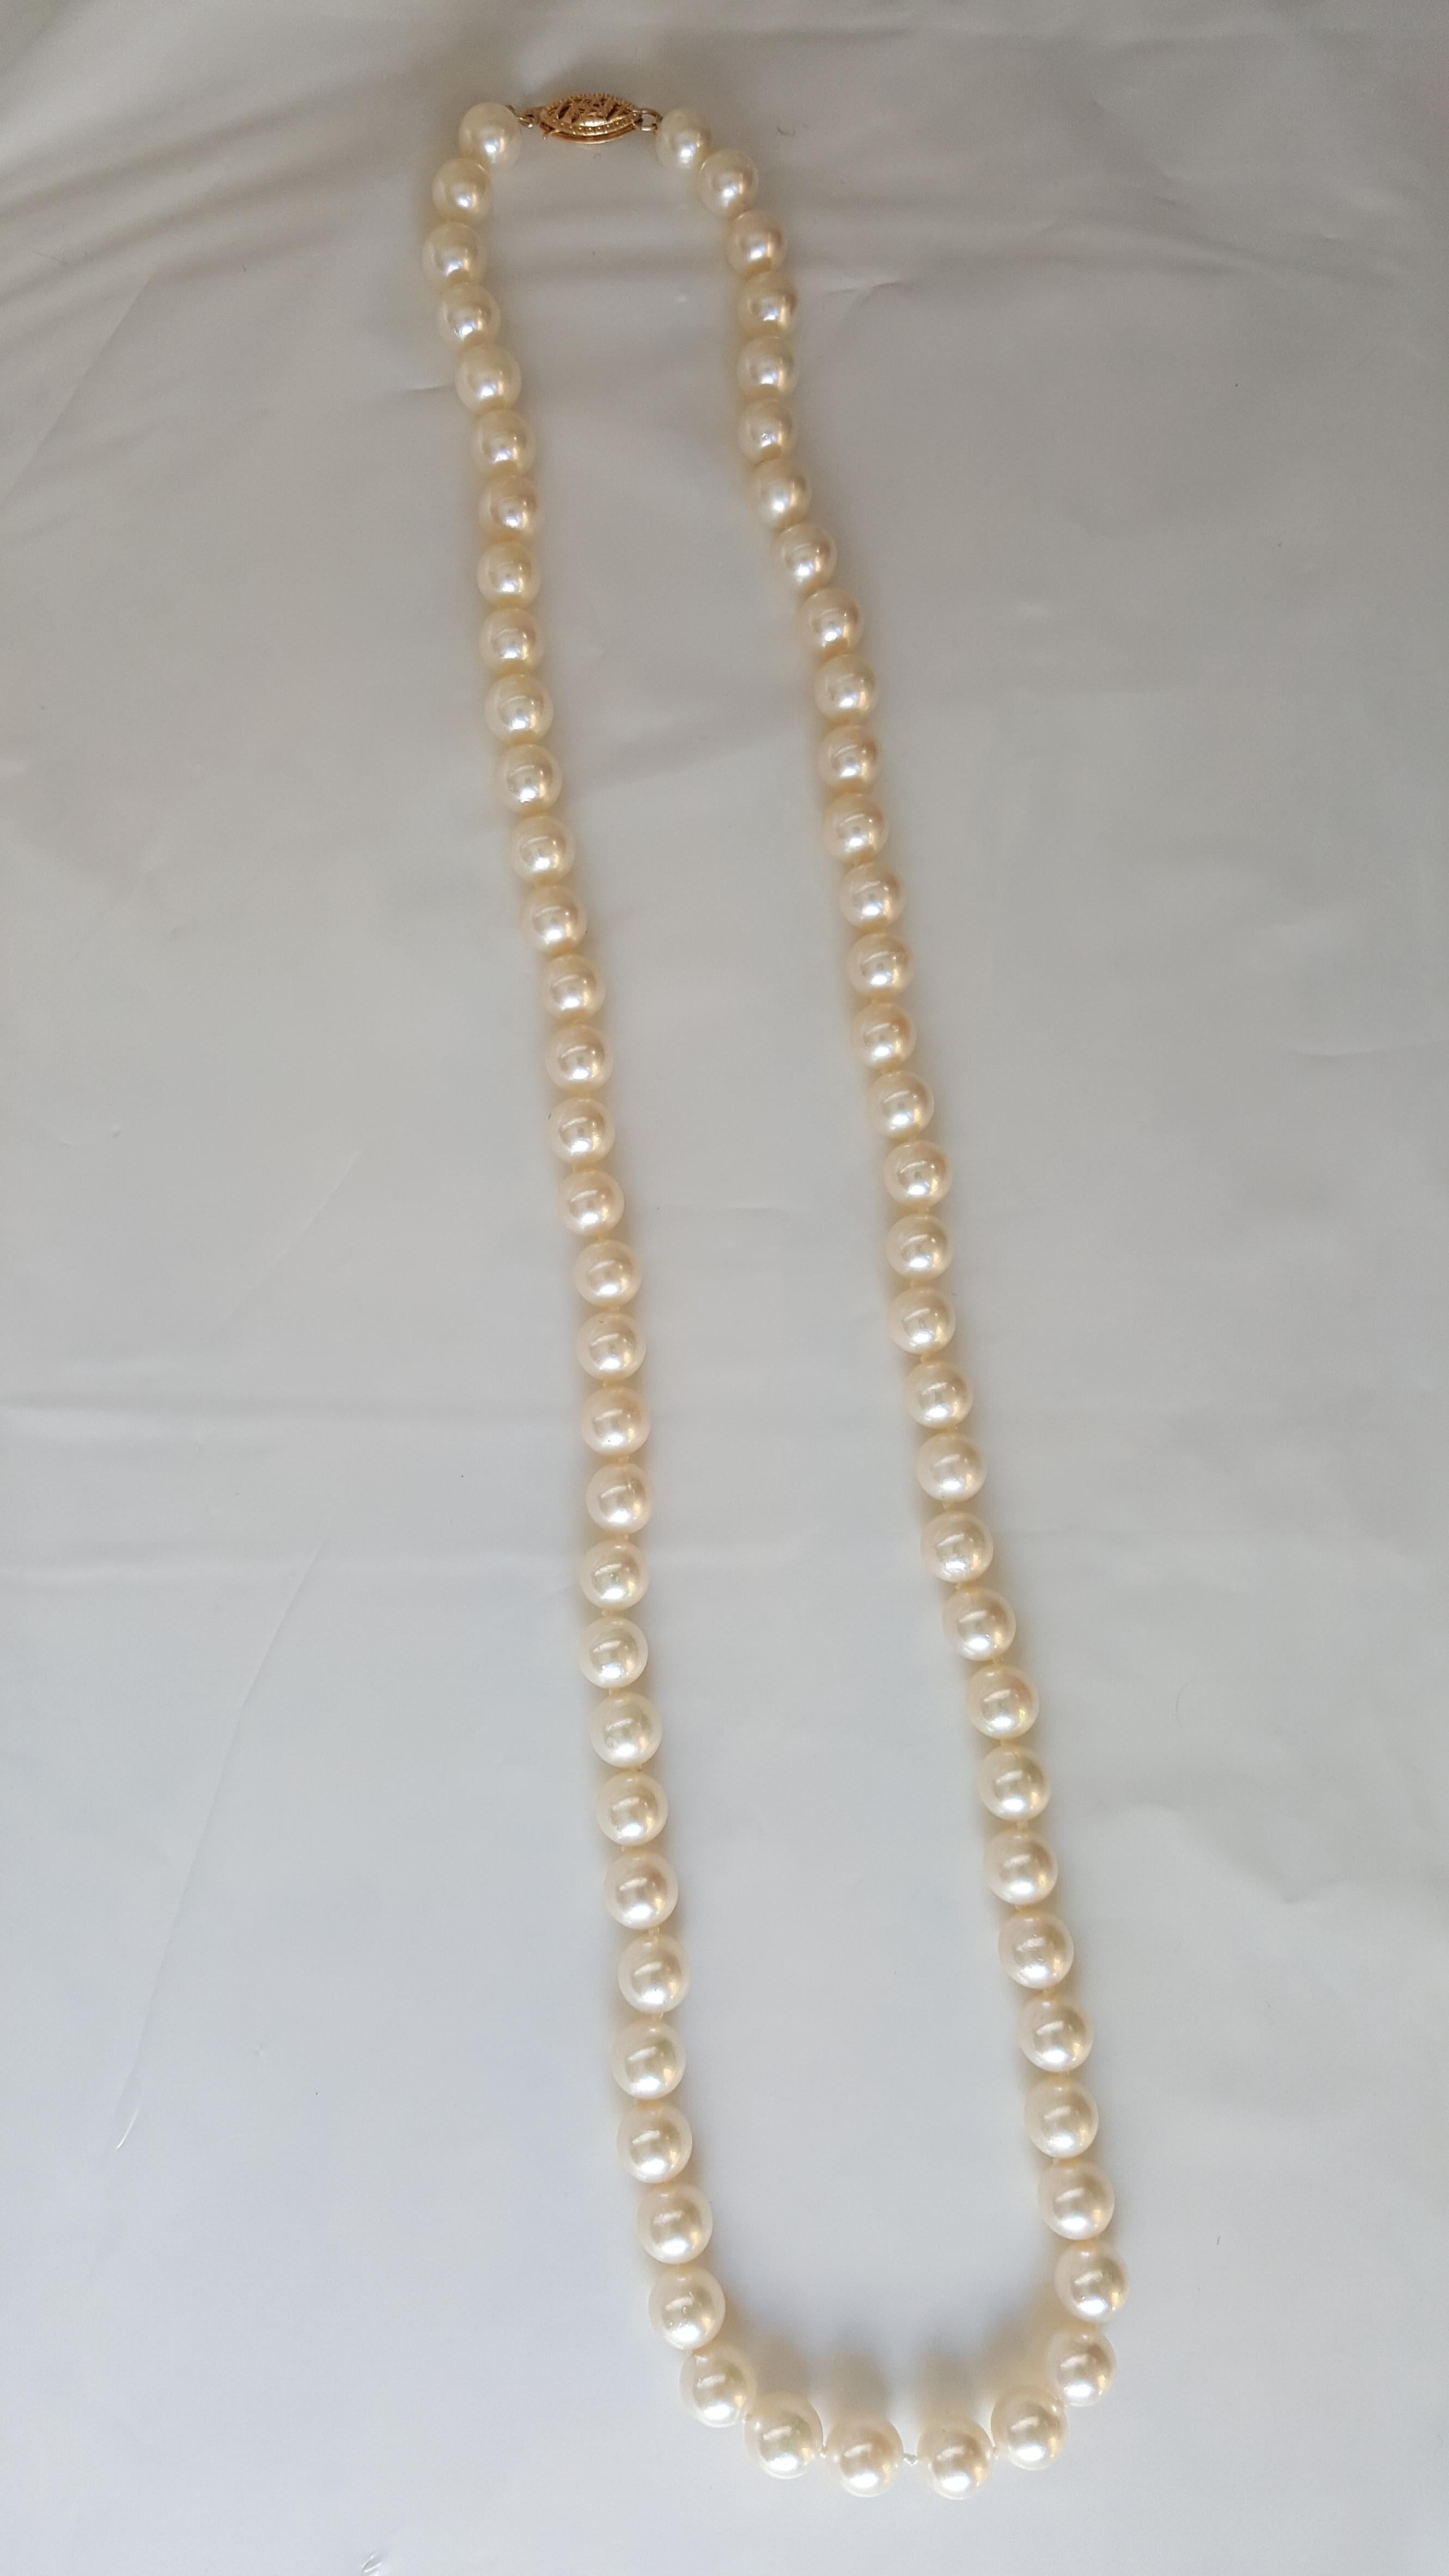 White Cultured Pearl Strand 6.8 mm 20 Inches 14kt Yellow Gold Clasp.
The pearls are in good condition, only one chipped pearl which is a pearl next to the clasp so it wouldn't be seen. The pearls have a very good luster and are freshly restrung. 